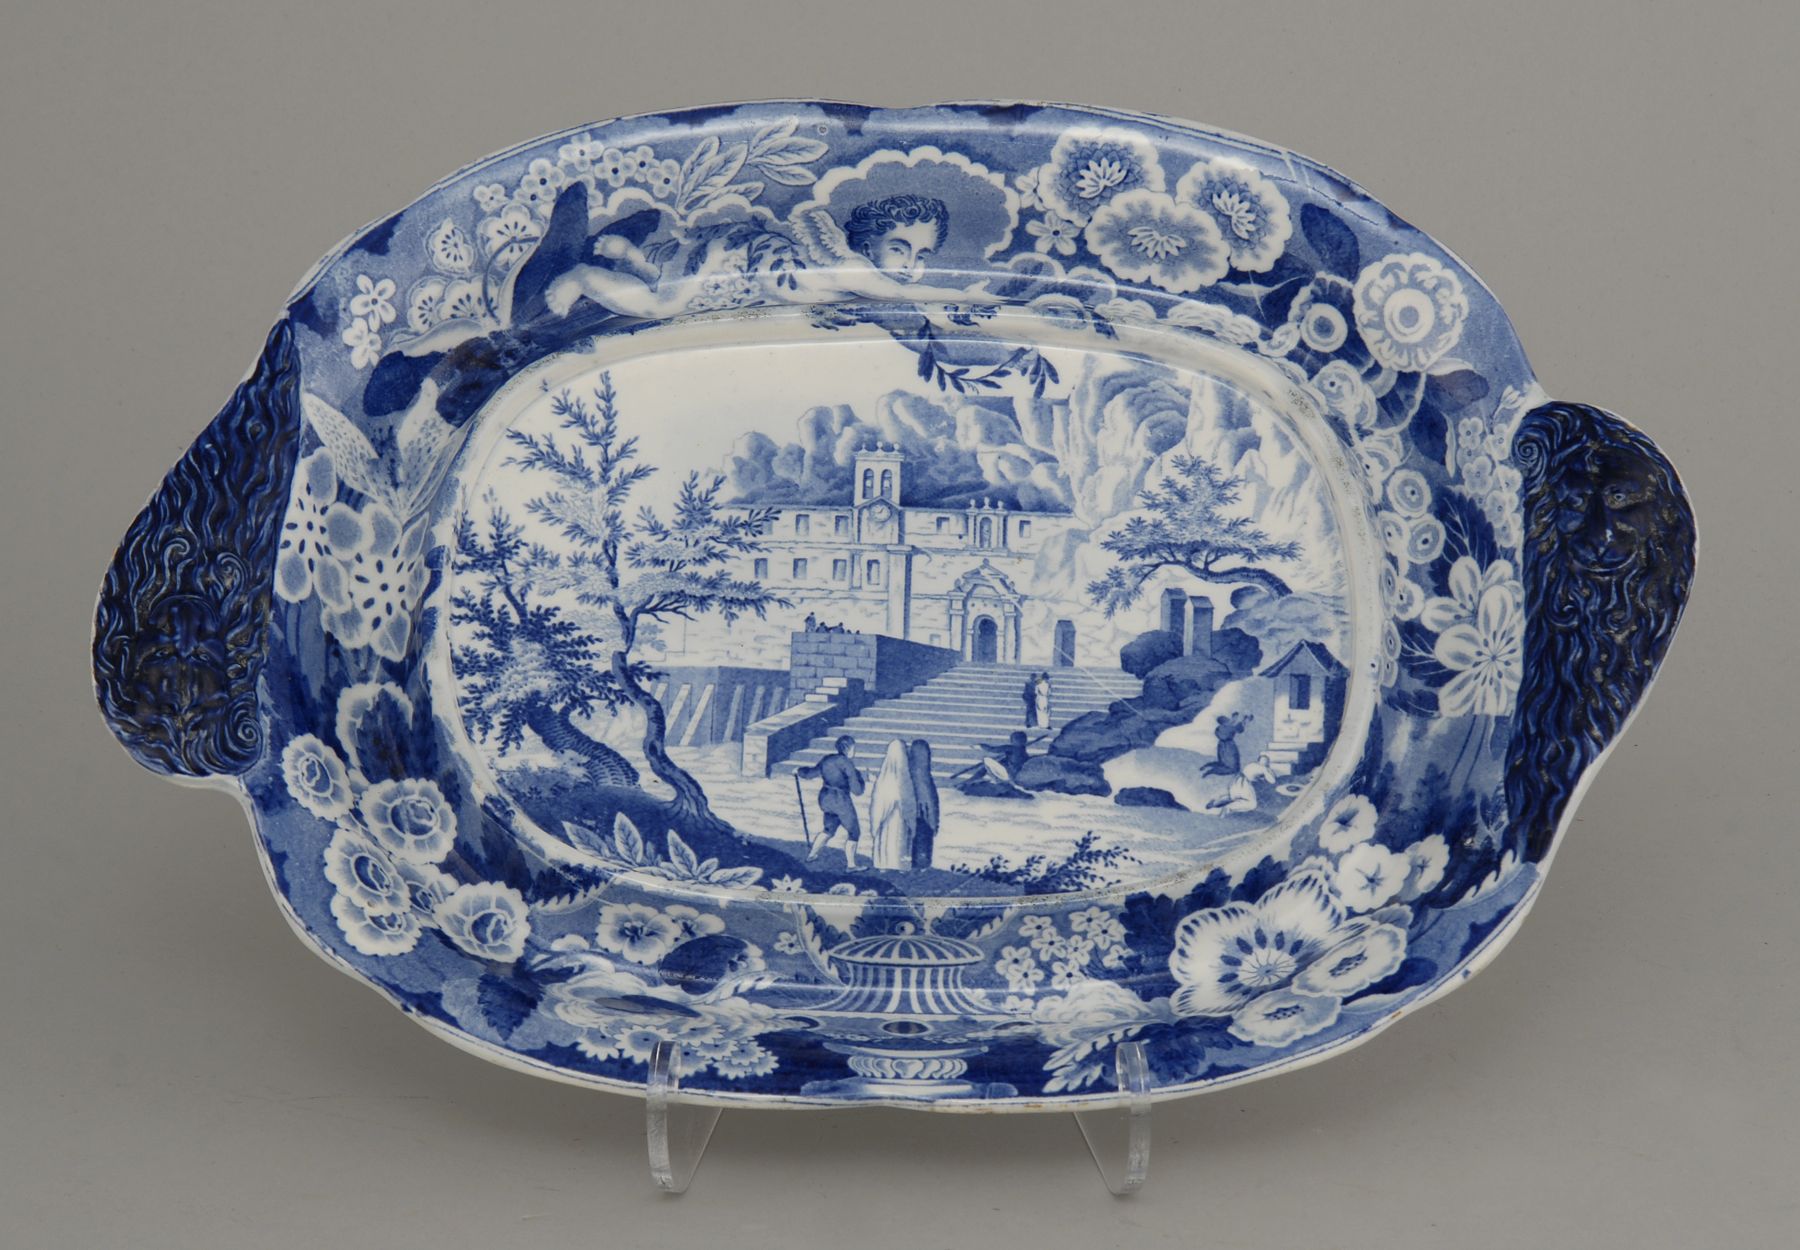 EARLY STAFFORDSHIRE BLUE AND WHITE